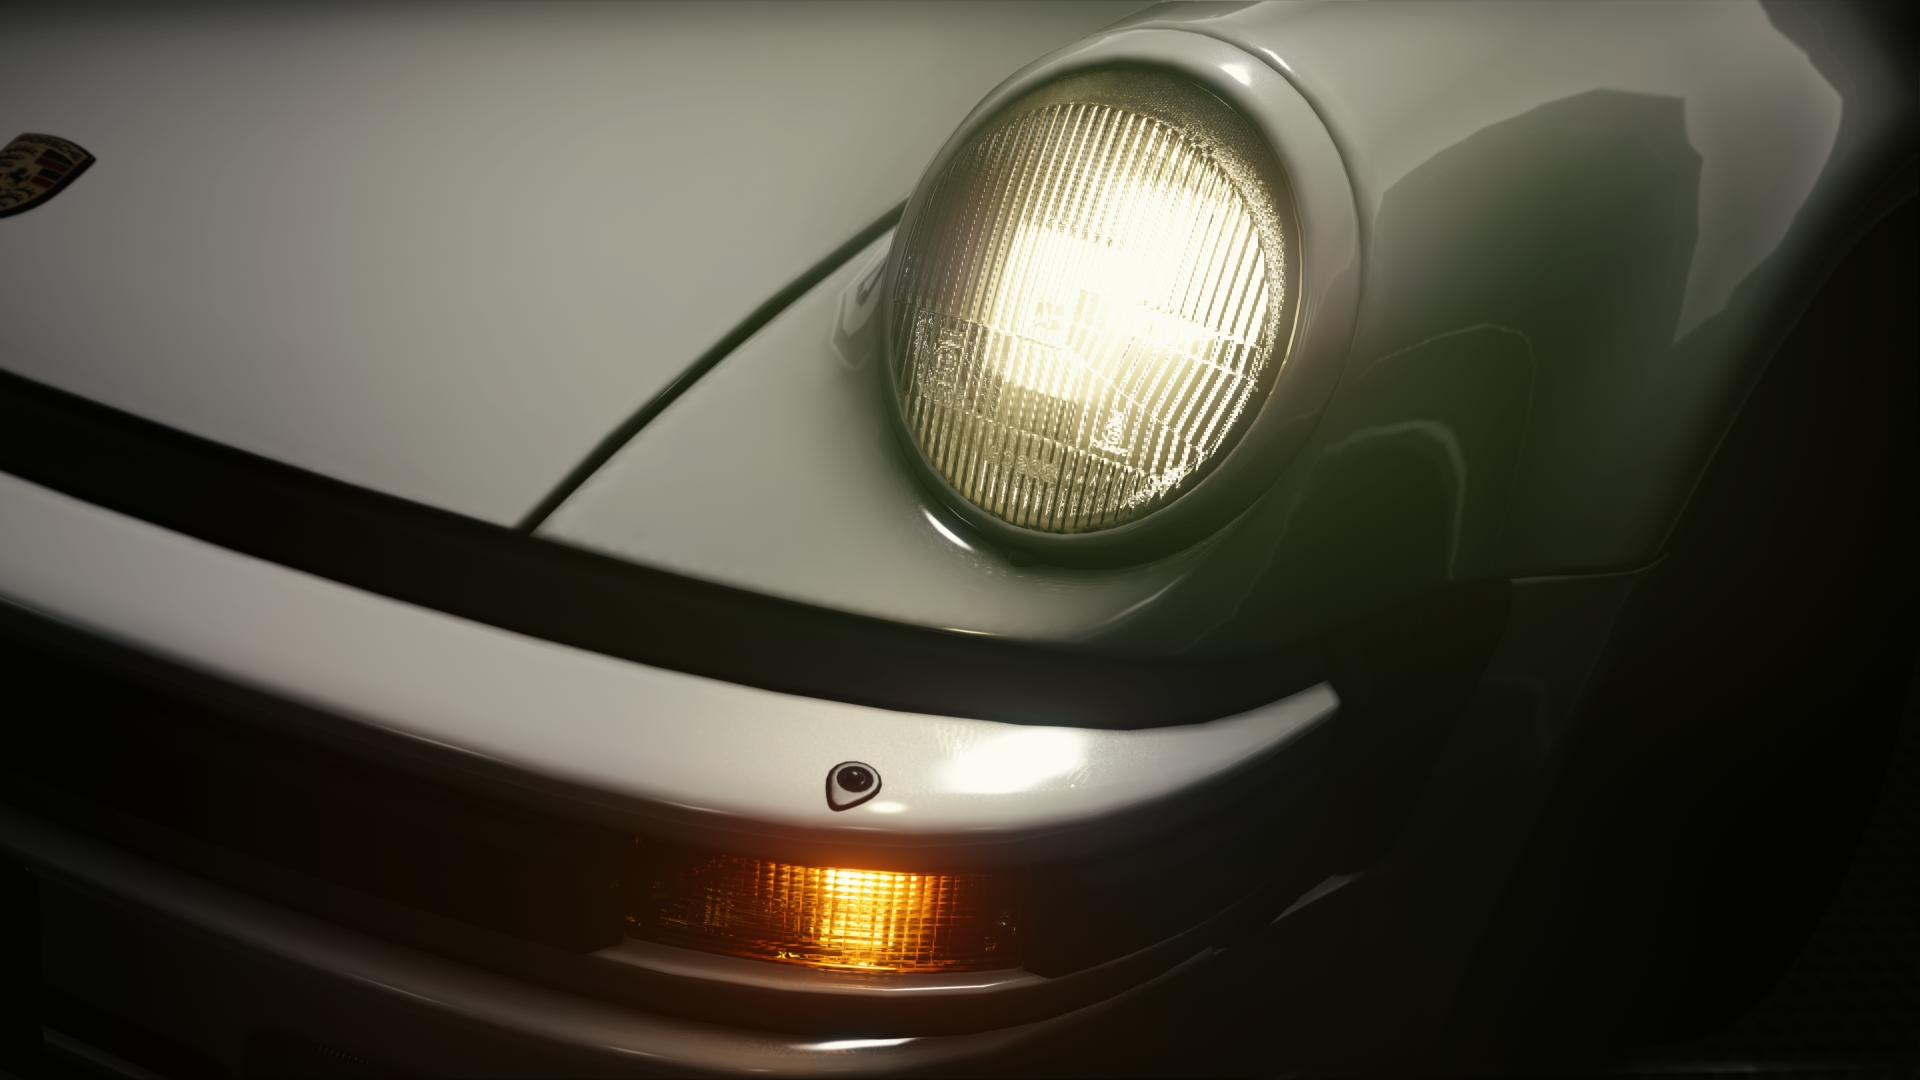 Optimized-Screenshot_axis_porsche_930_le_jt_showroom_filter_snw_real_graded-30-0-122-14-39-38.jpg